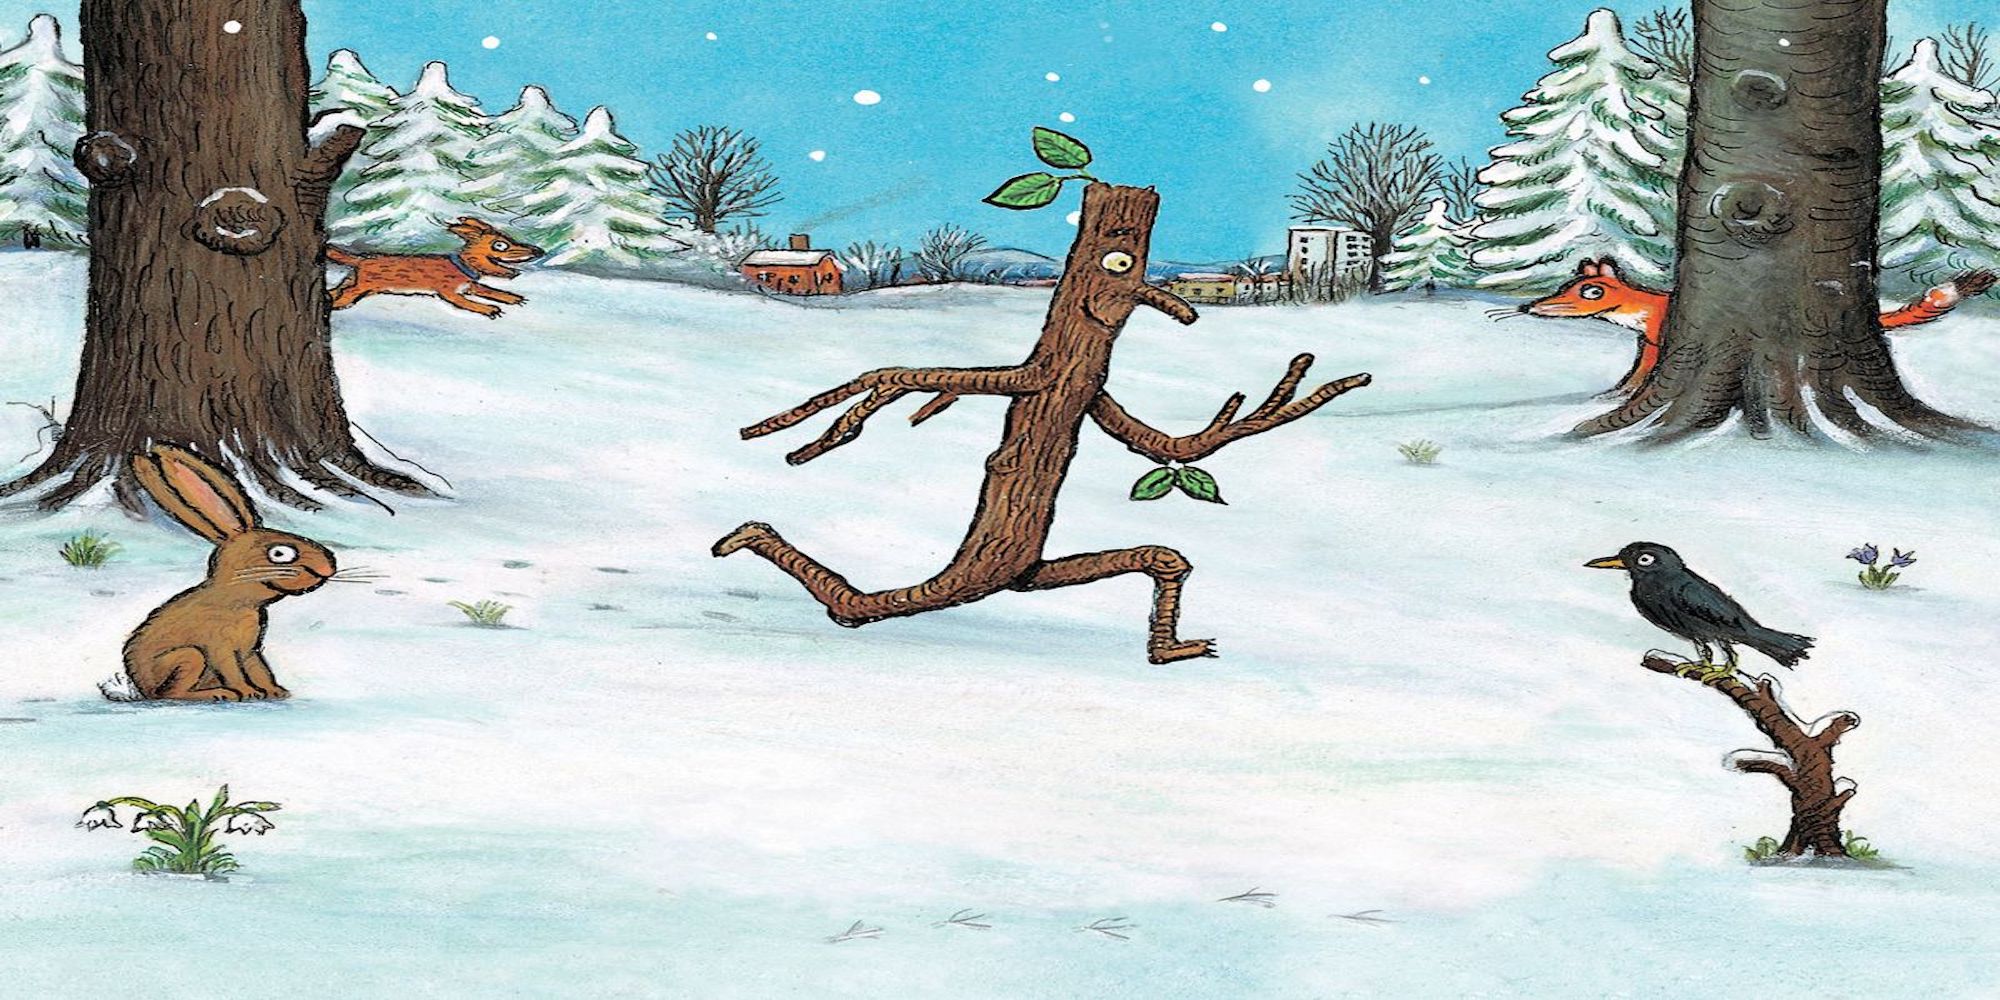 An image of a Stick given human features running across a snowy field with trees and buildings in the background. Woodland creatures can also be seen in the image.